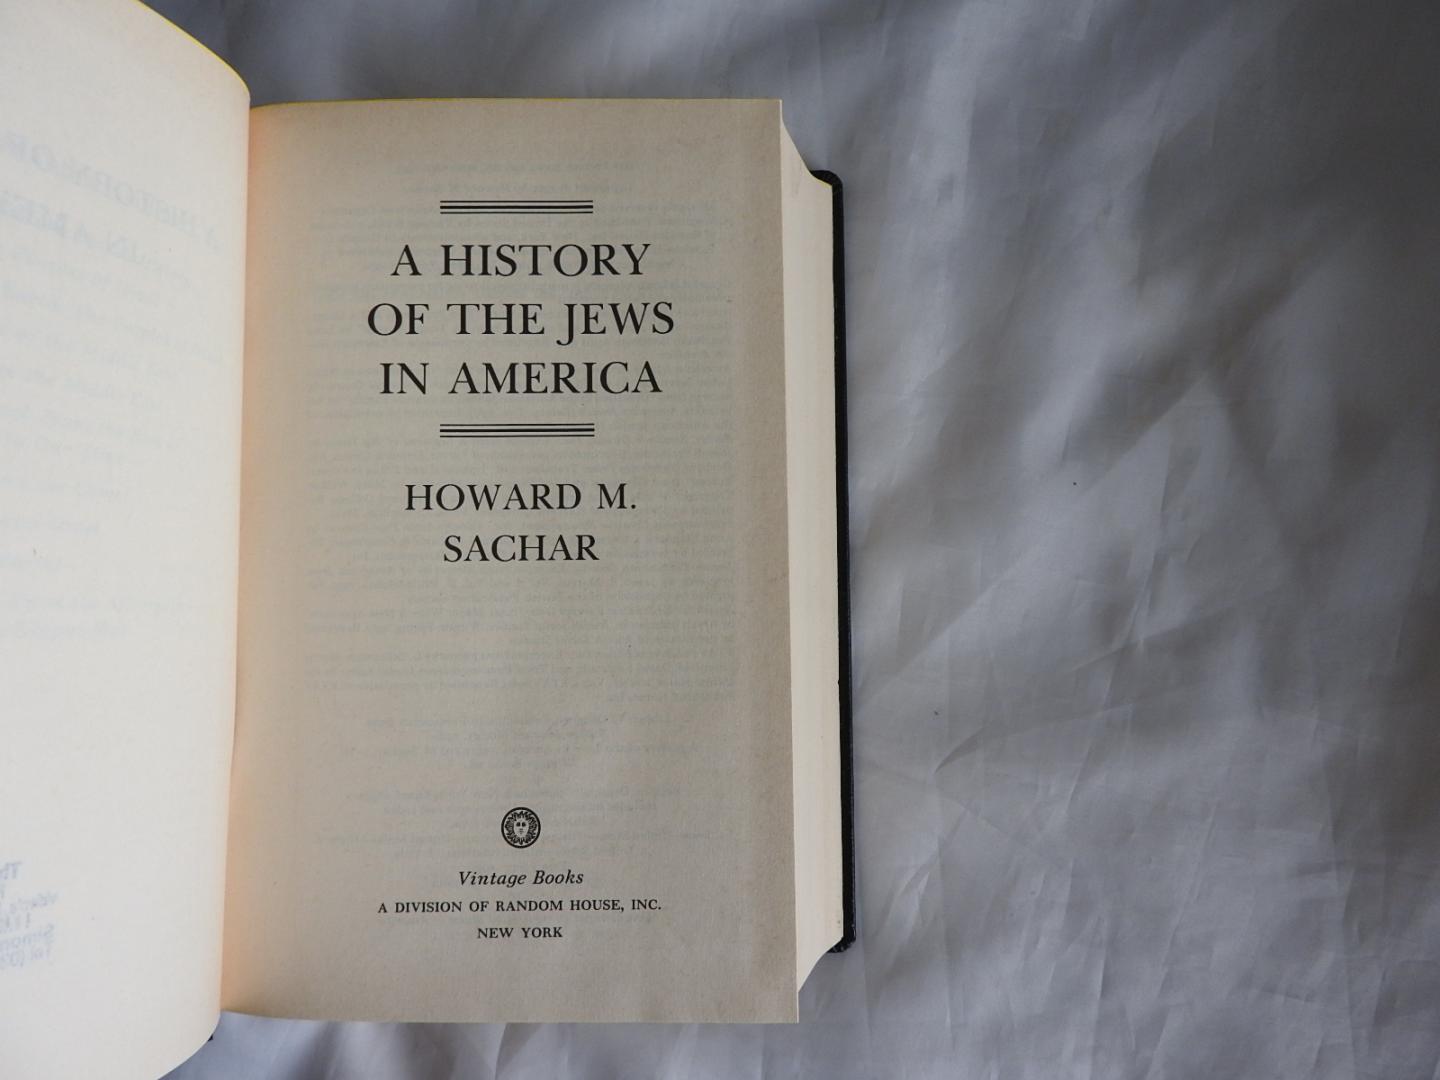 Sachar Howard Morley M. - A history of the Jews in America